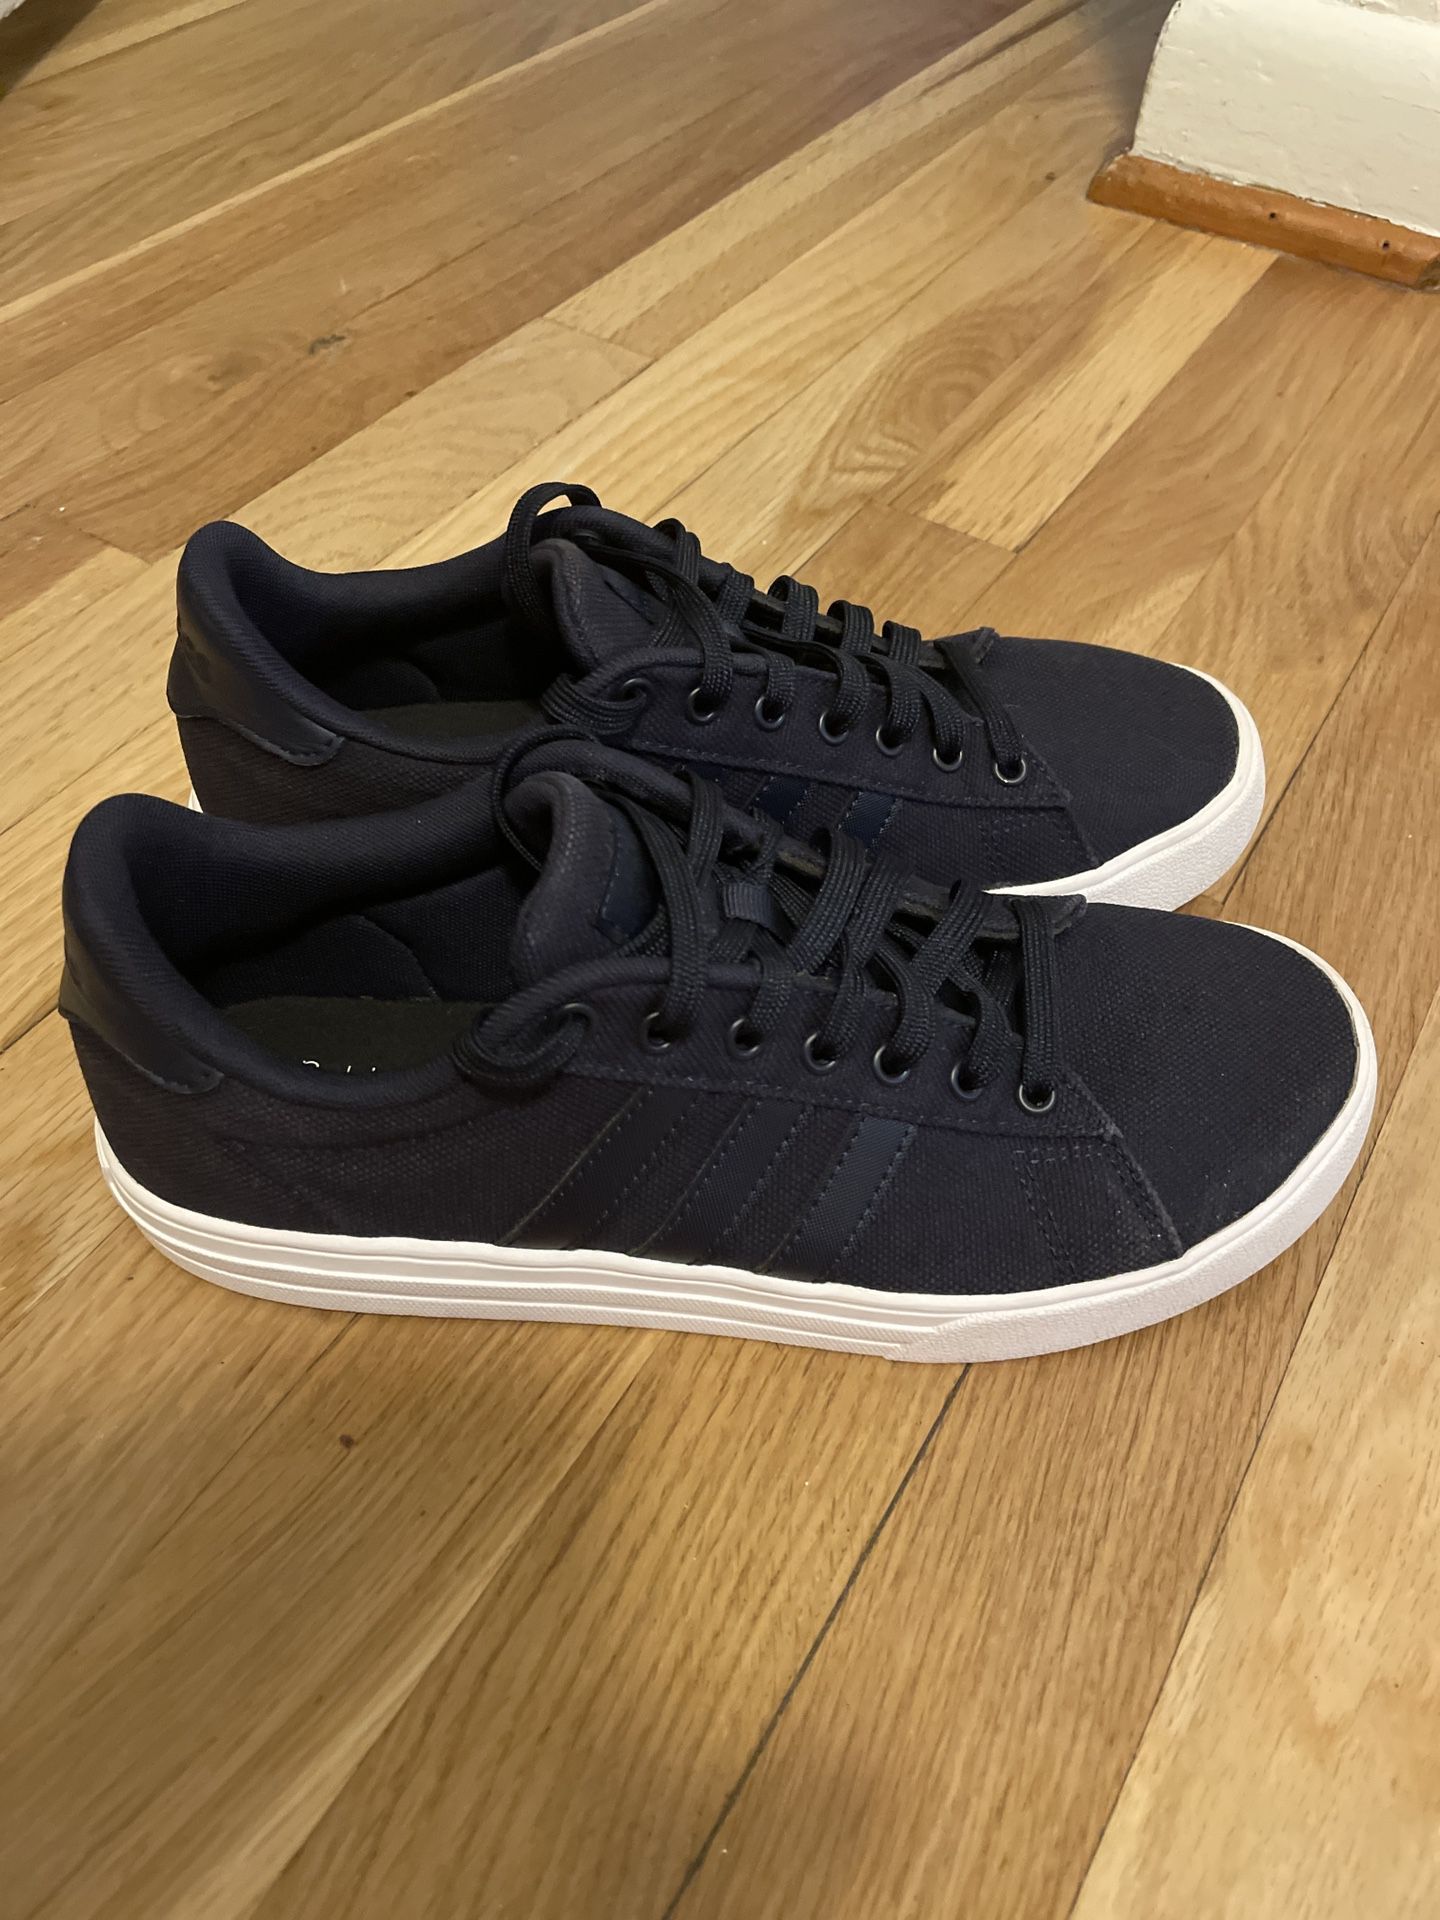 Teoría establecida Puntualidad Pertenecer a Mens Adidas Ortholite Float tennis sneakers navy blue Size 8 for Sale in  Joint Base Lewis-mcchord, WA - OfferUp